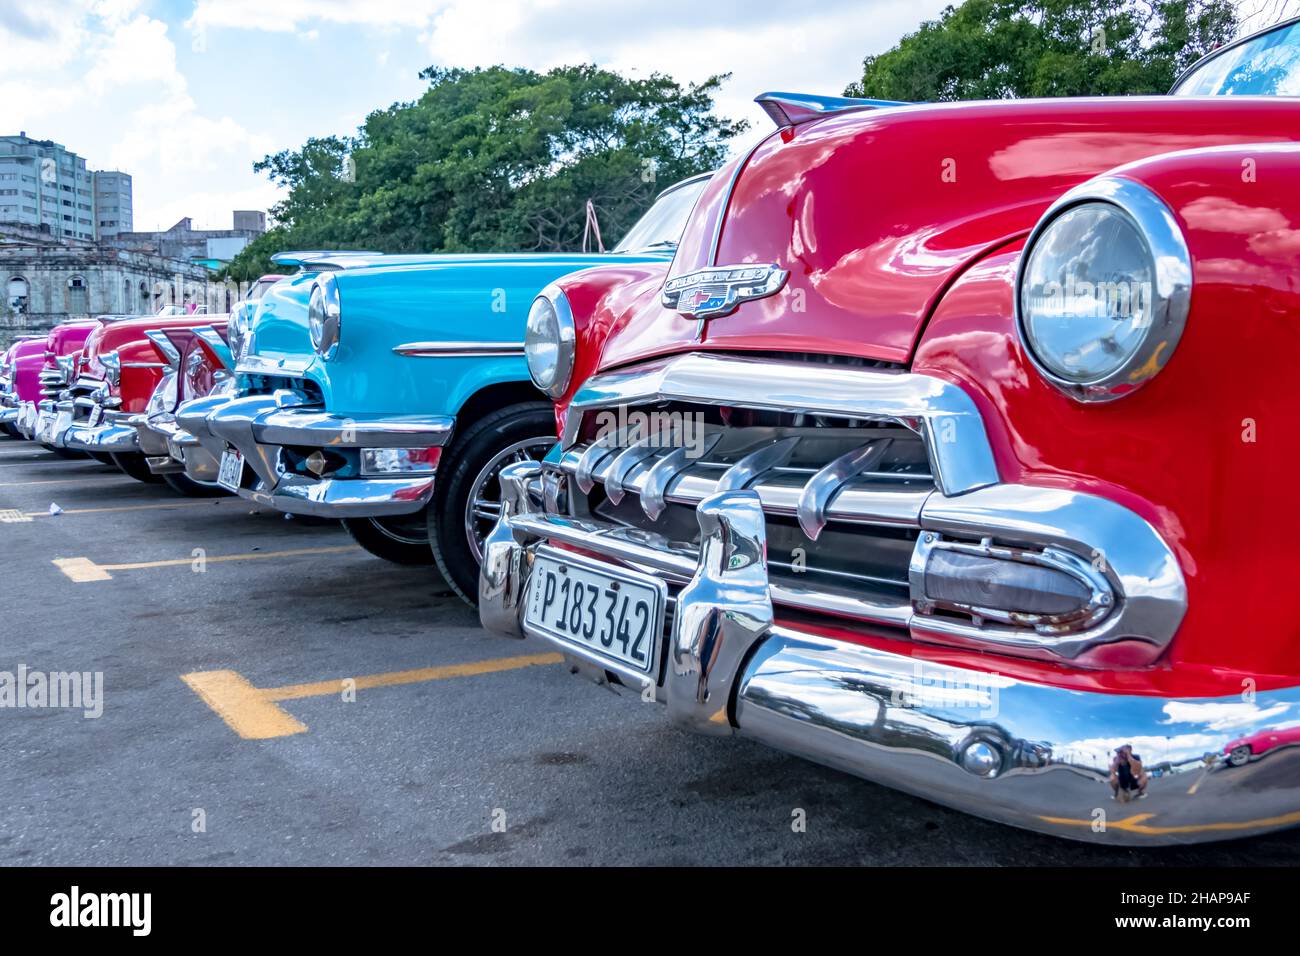 Row of classic Cuban cars of varying colors Stock Photo